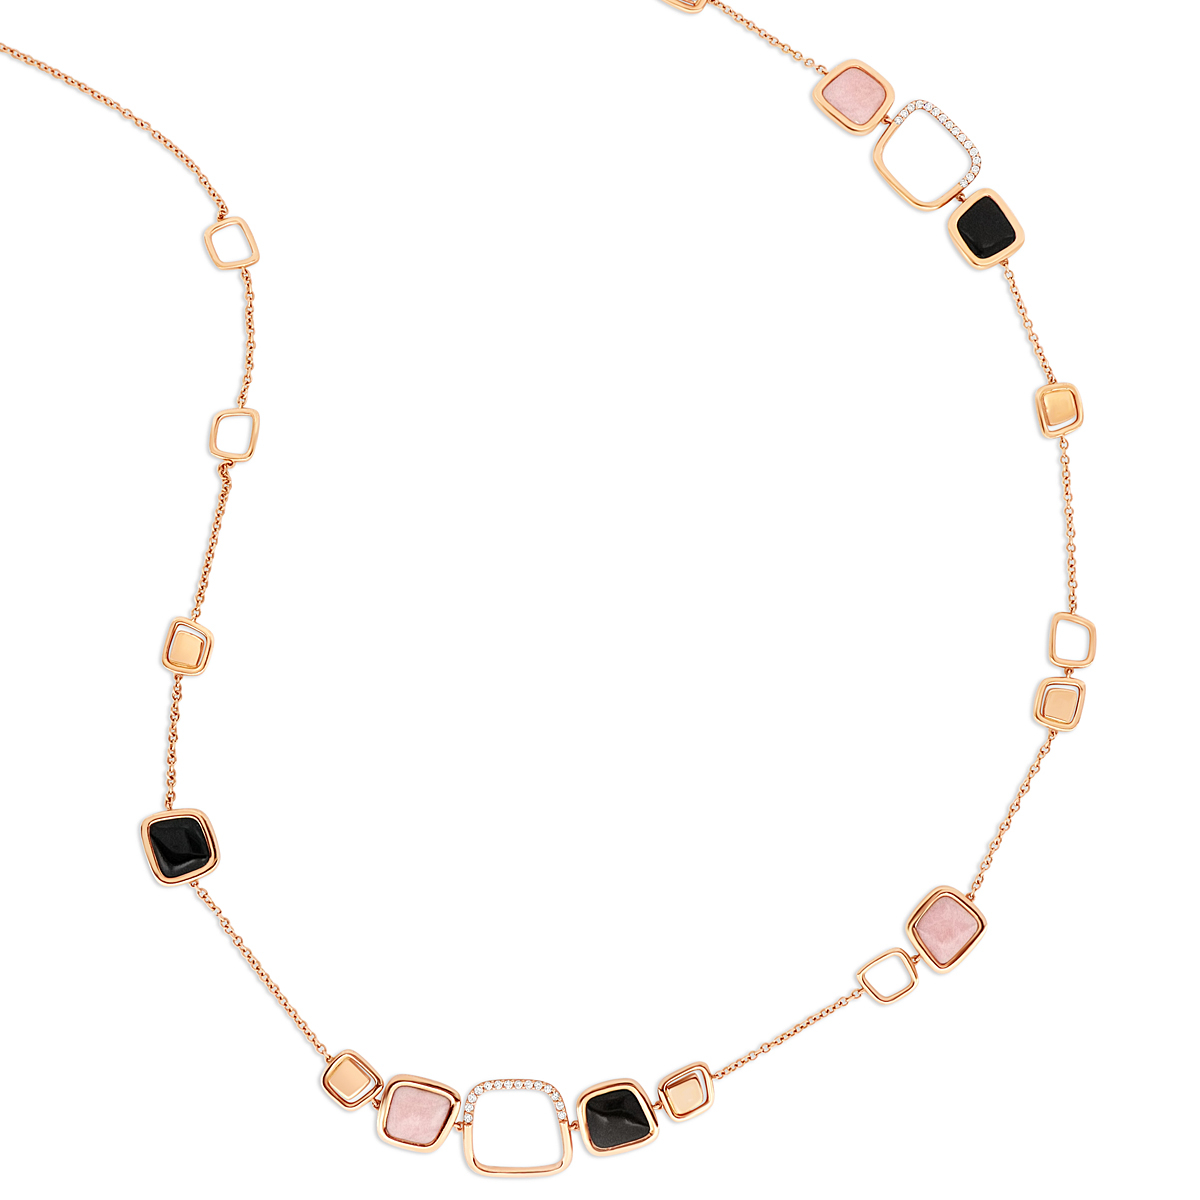 Onyx and Pink Opal Long Square Necklace in 18K Rose Gold